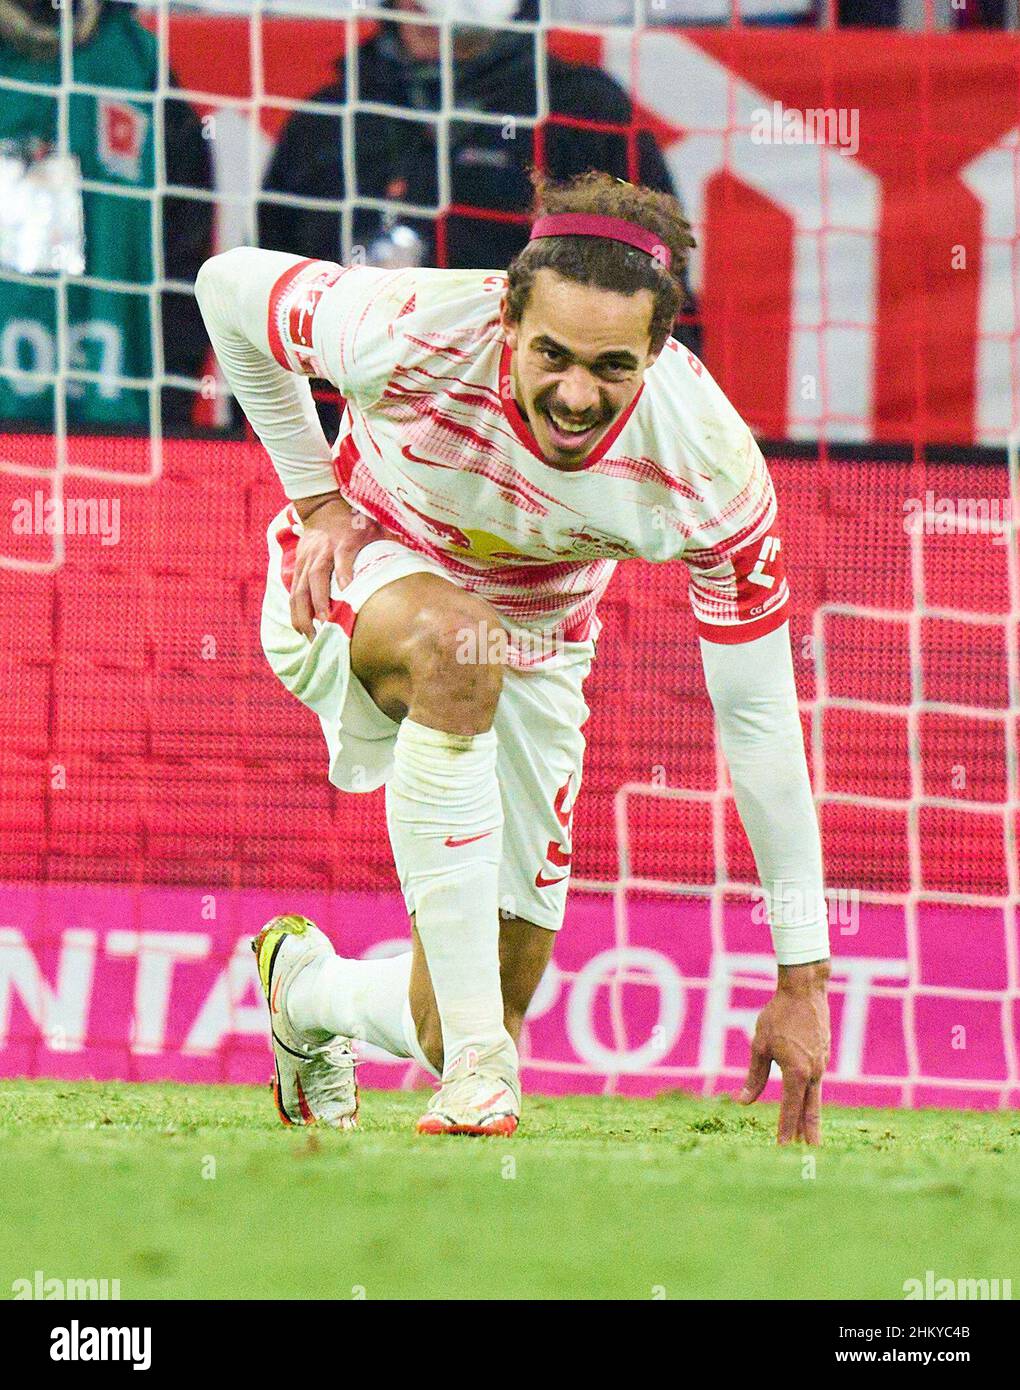 Yussuf POULSEN, RB Leipzig 9 sad in the match FC BAYERN MÜNCHEN - RB LEIPZIG 1.German Football League on Feb 5, 2022 in Munich, Germany. Season 2021/2022, matchday 21, 1.Bundesliga, FCB, München, 21.Spieltag. FCB © Peter Schatz / Alamy Live News    - DFL REGULATIONS PROHIBIT ANY USE OF PHOTOGRAPHS as IMAGE SEQUENCES and/or QUASI-VIDEO - Stock Photo